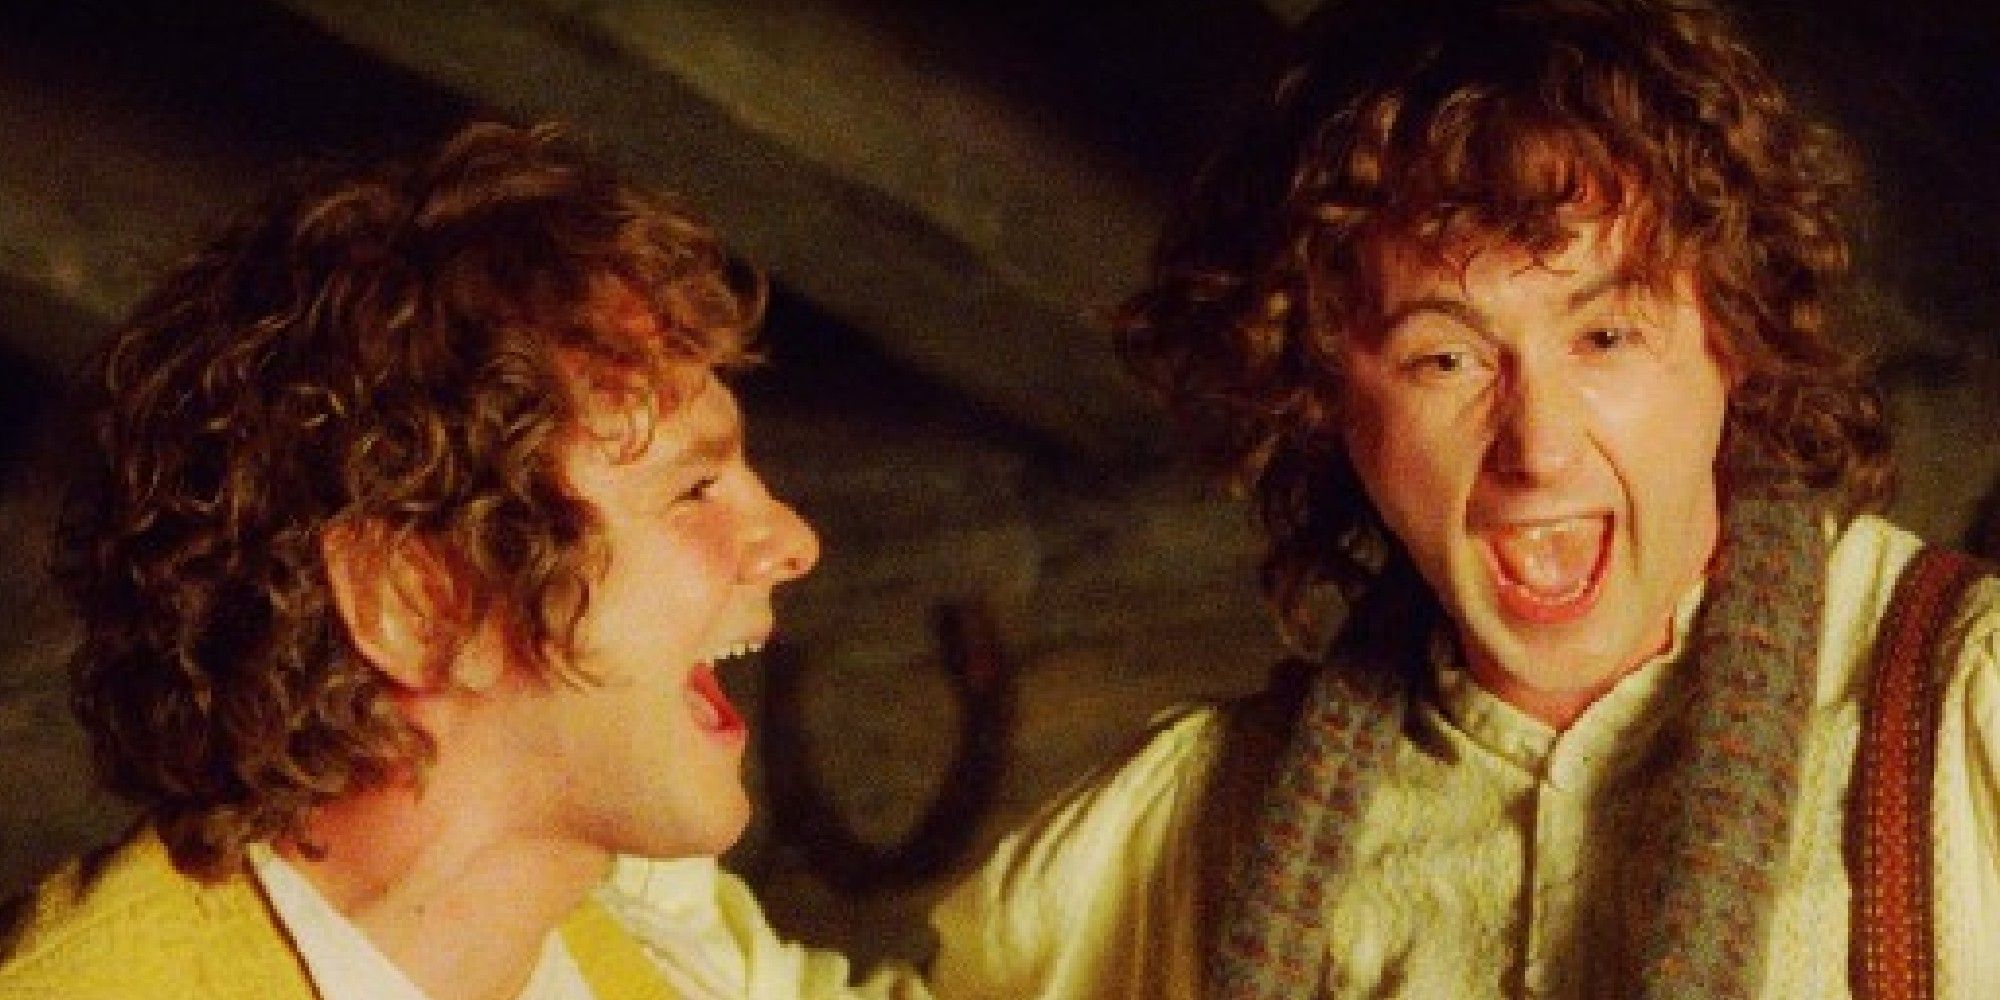 Merry and Pippin laughing heartil in the Lord of the RIngs